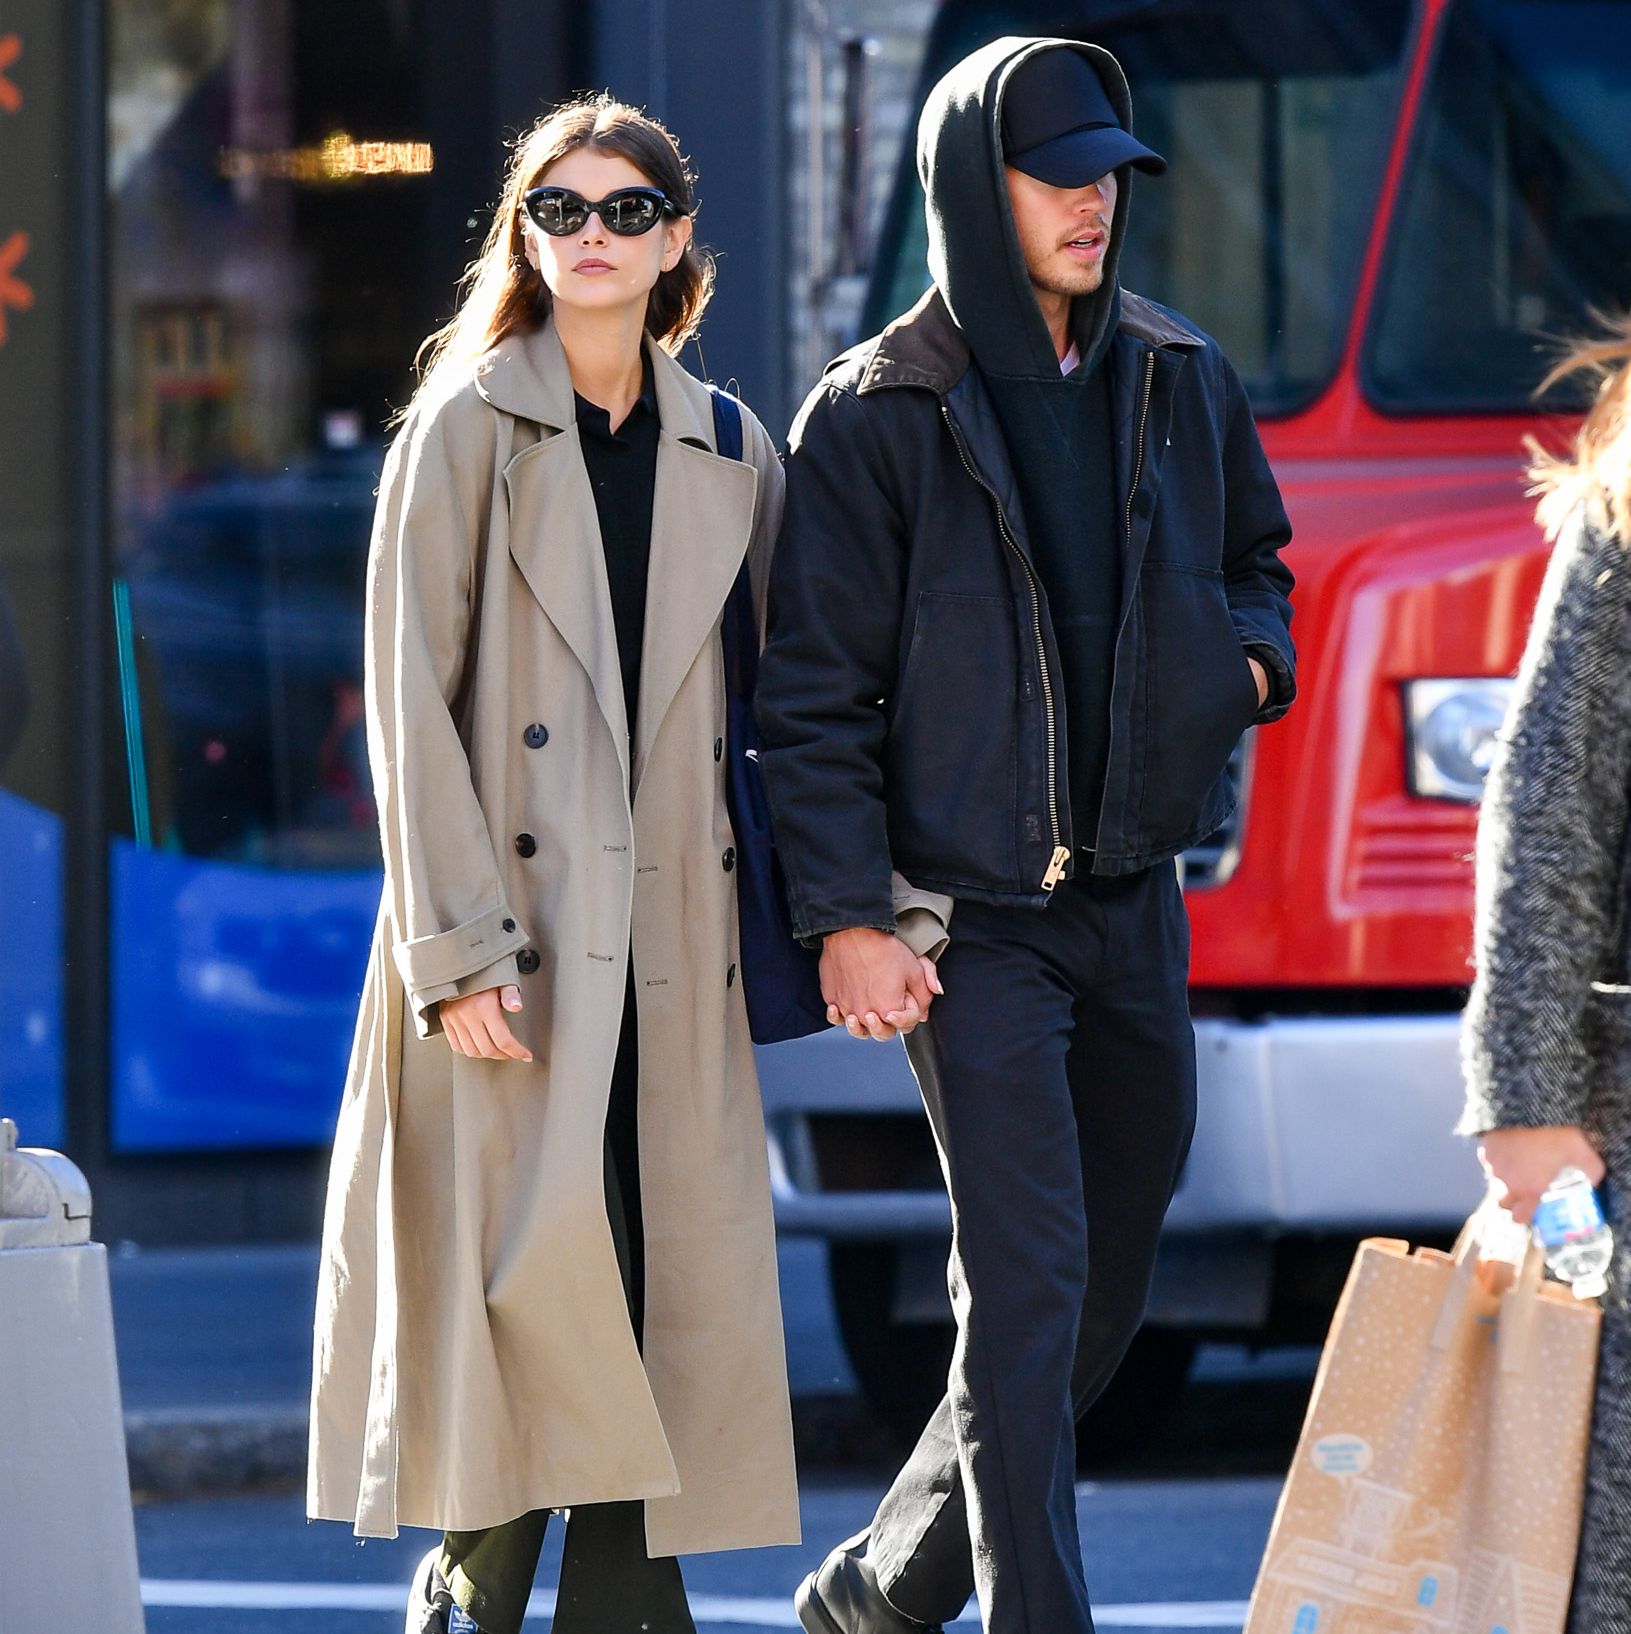 Kaia Gerber and Austin Butler Look So Sleek During Shopping Date in NYC